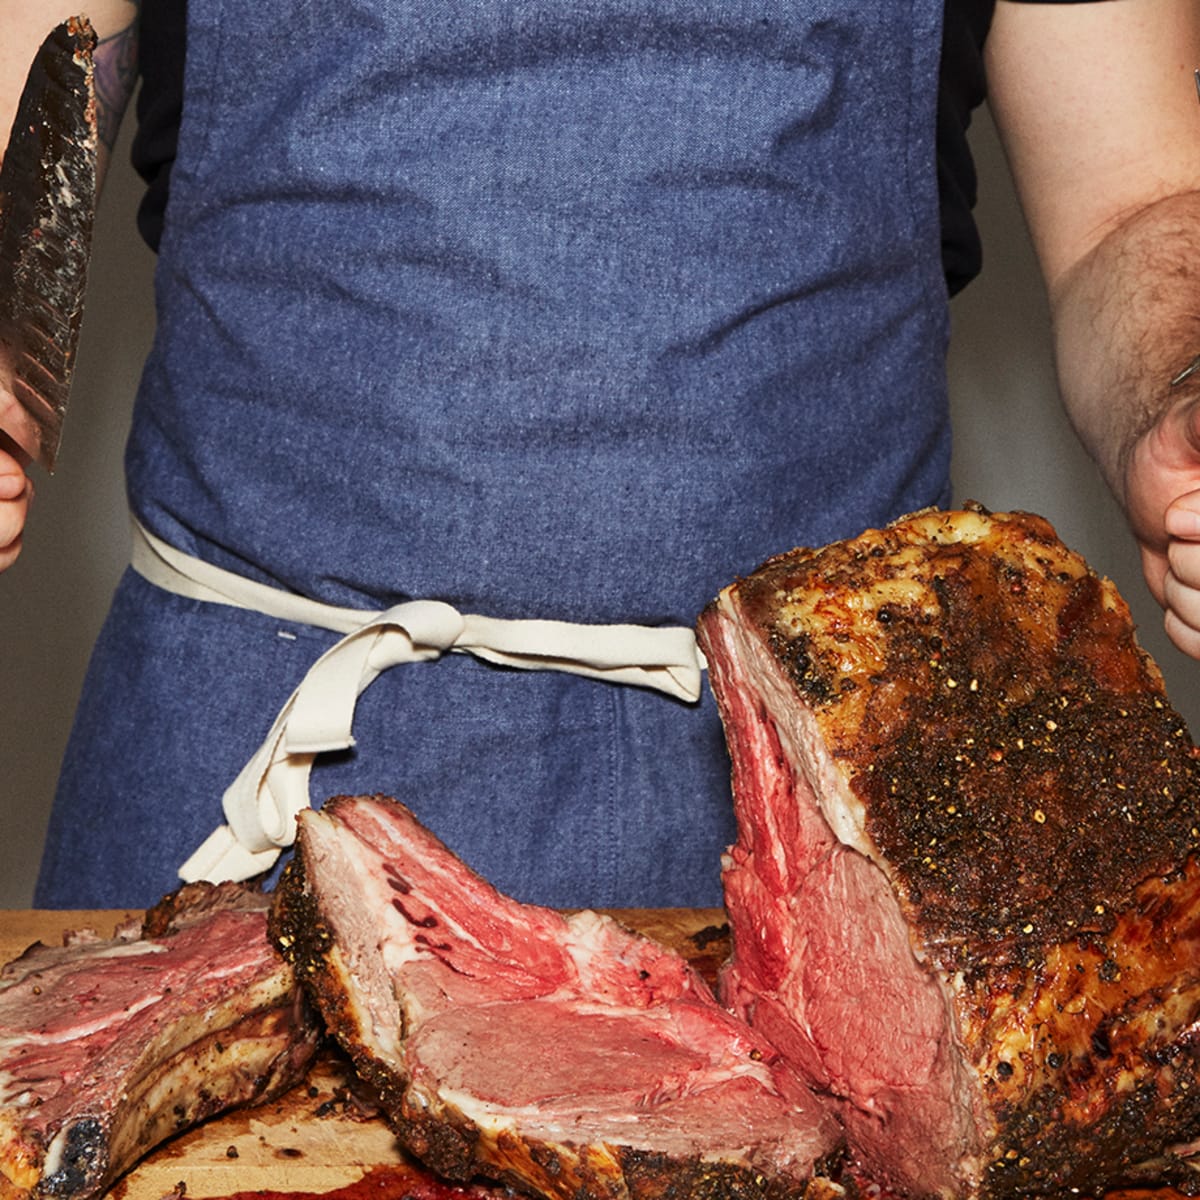 Meat Temperature Guide: Master the Art of Cooking Meats - No Spoon Necessary